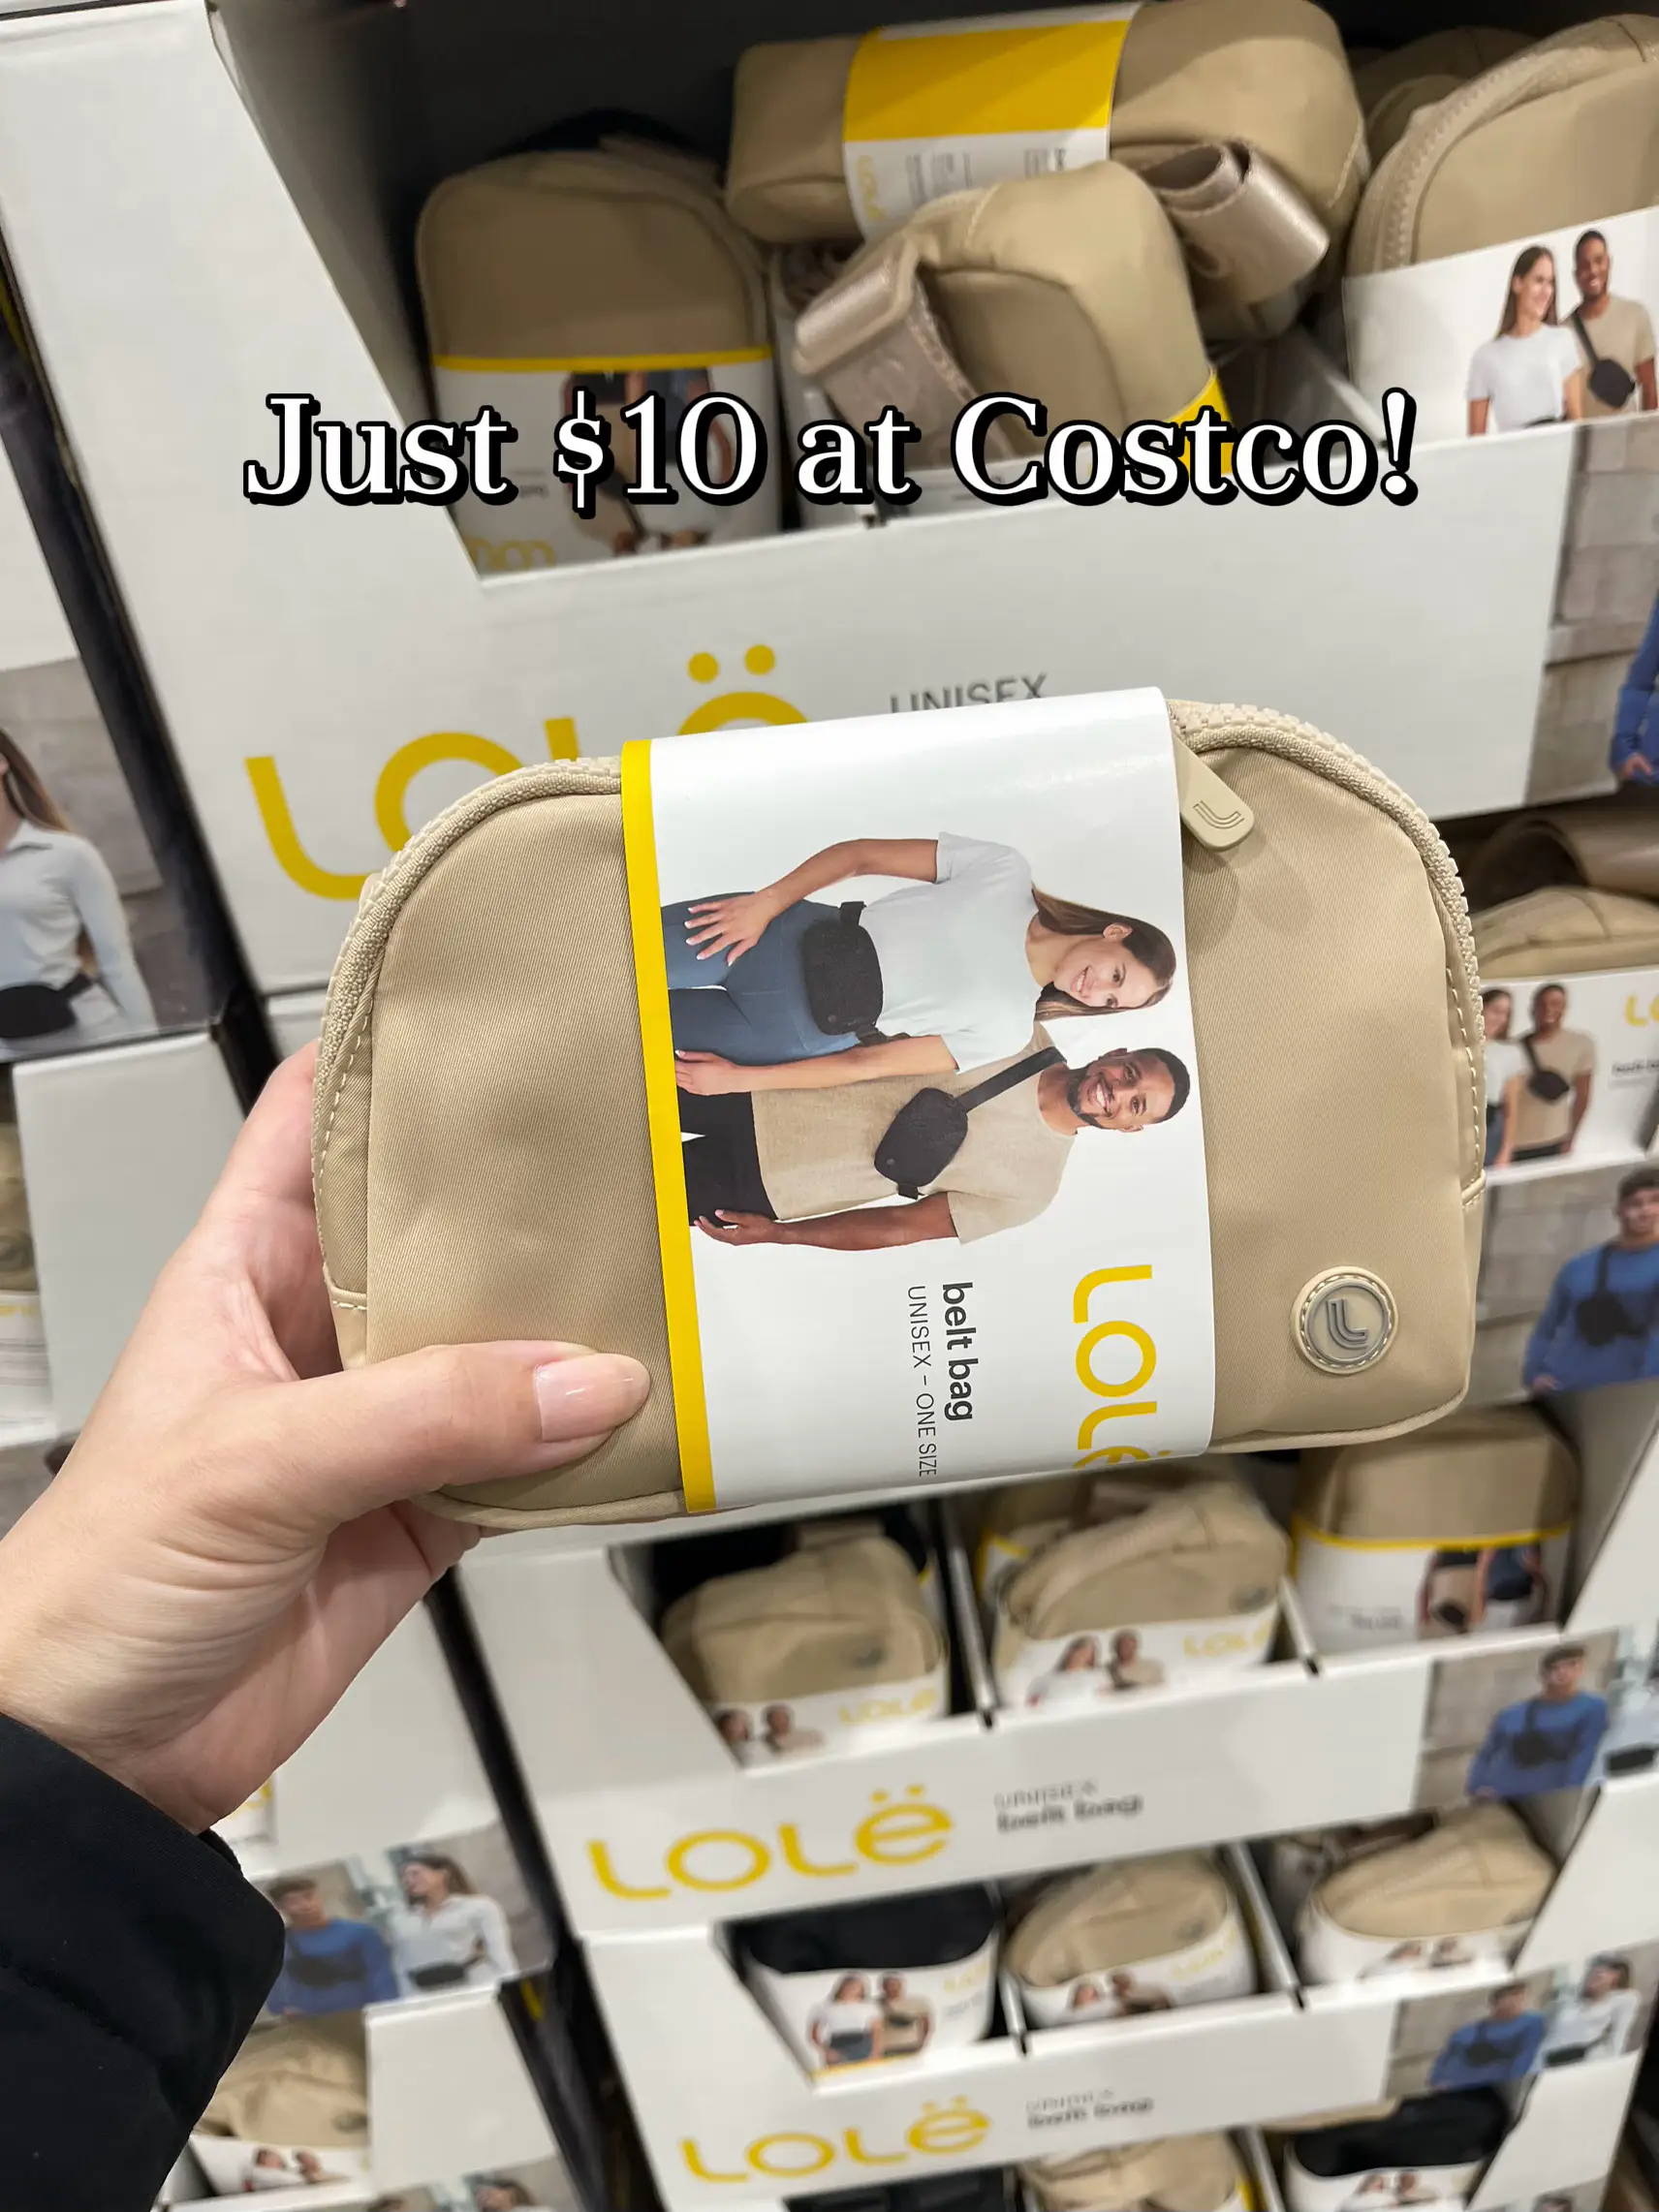 Lululemon Belt Bag Dupes are at Costco! These Lole unisex bags